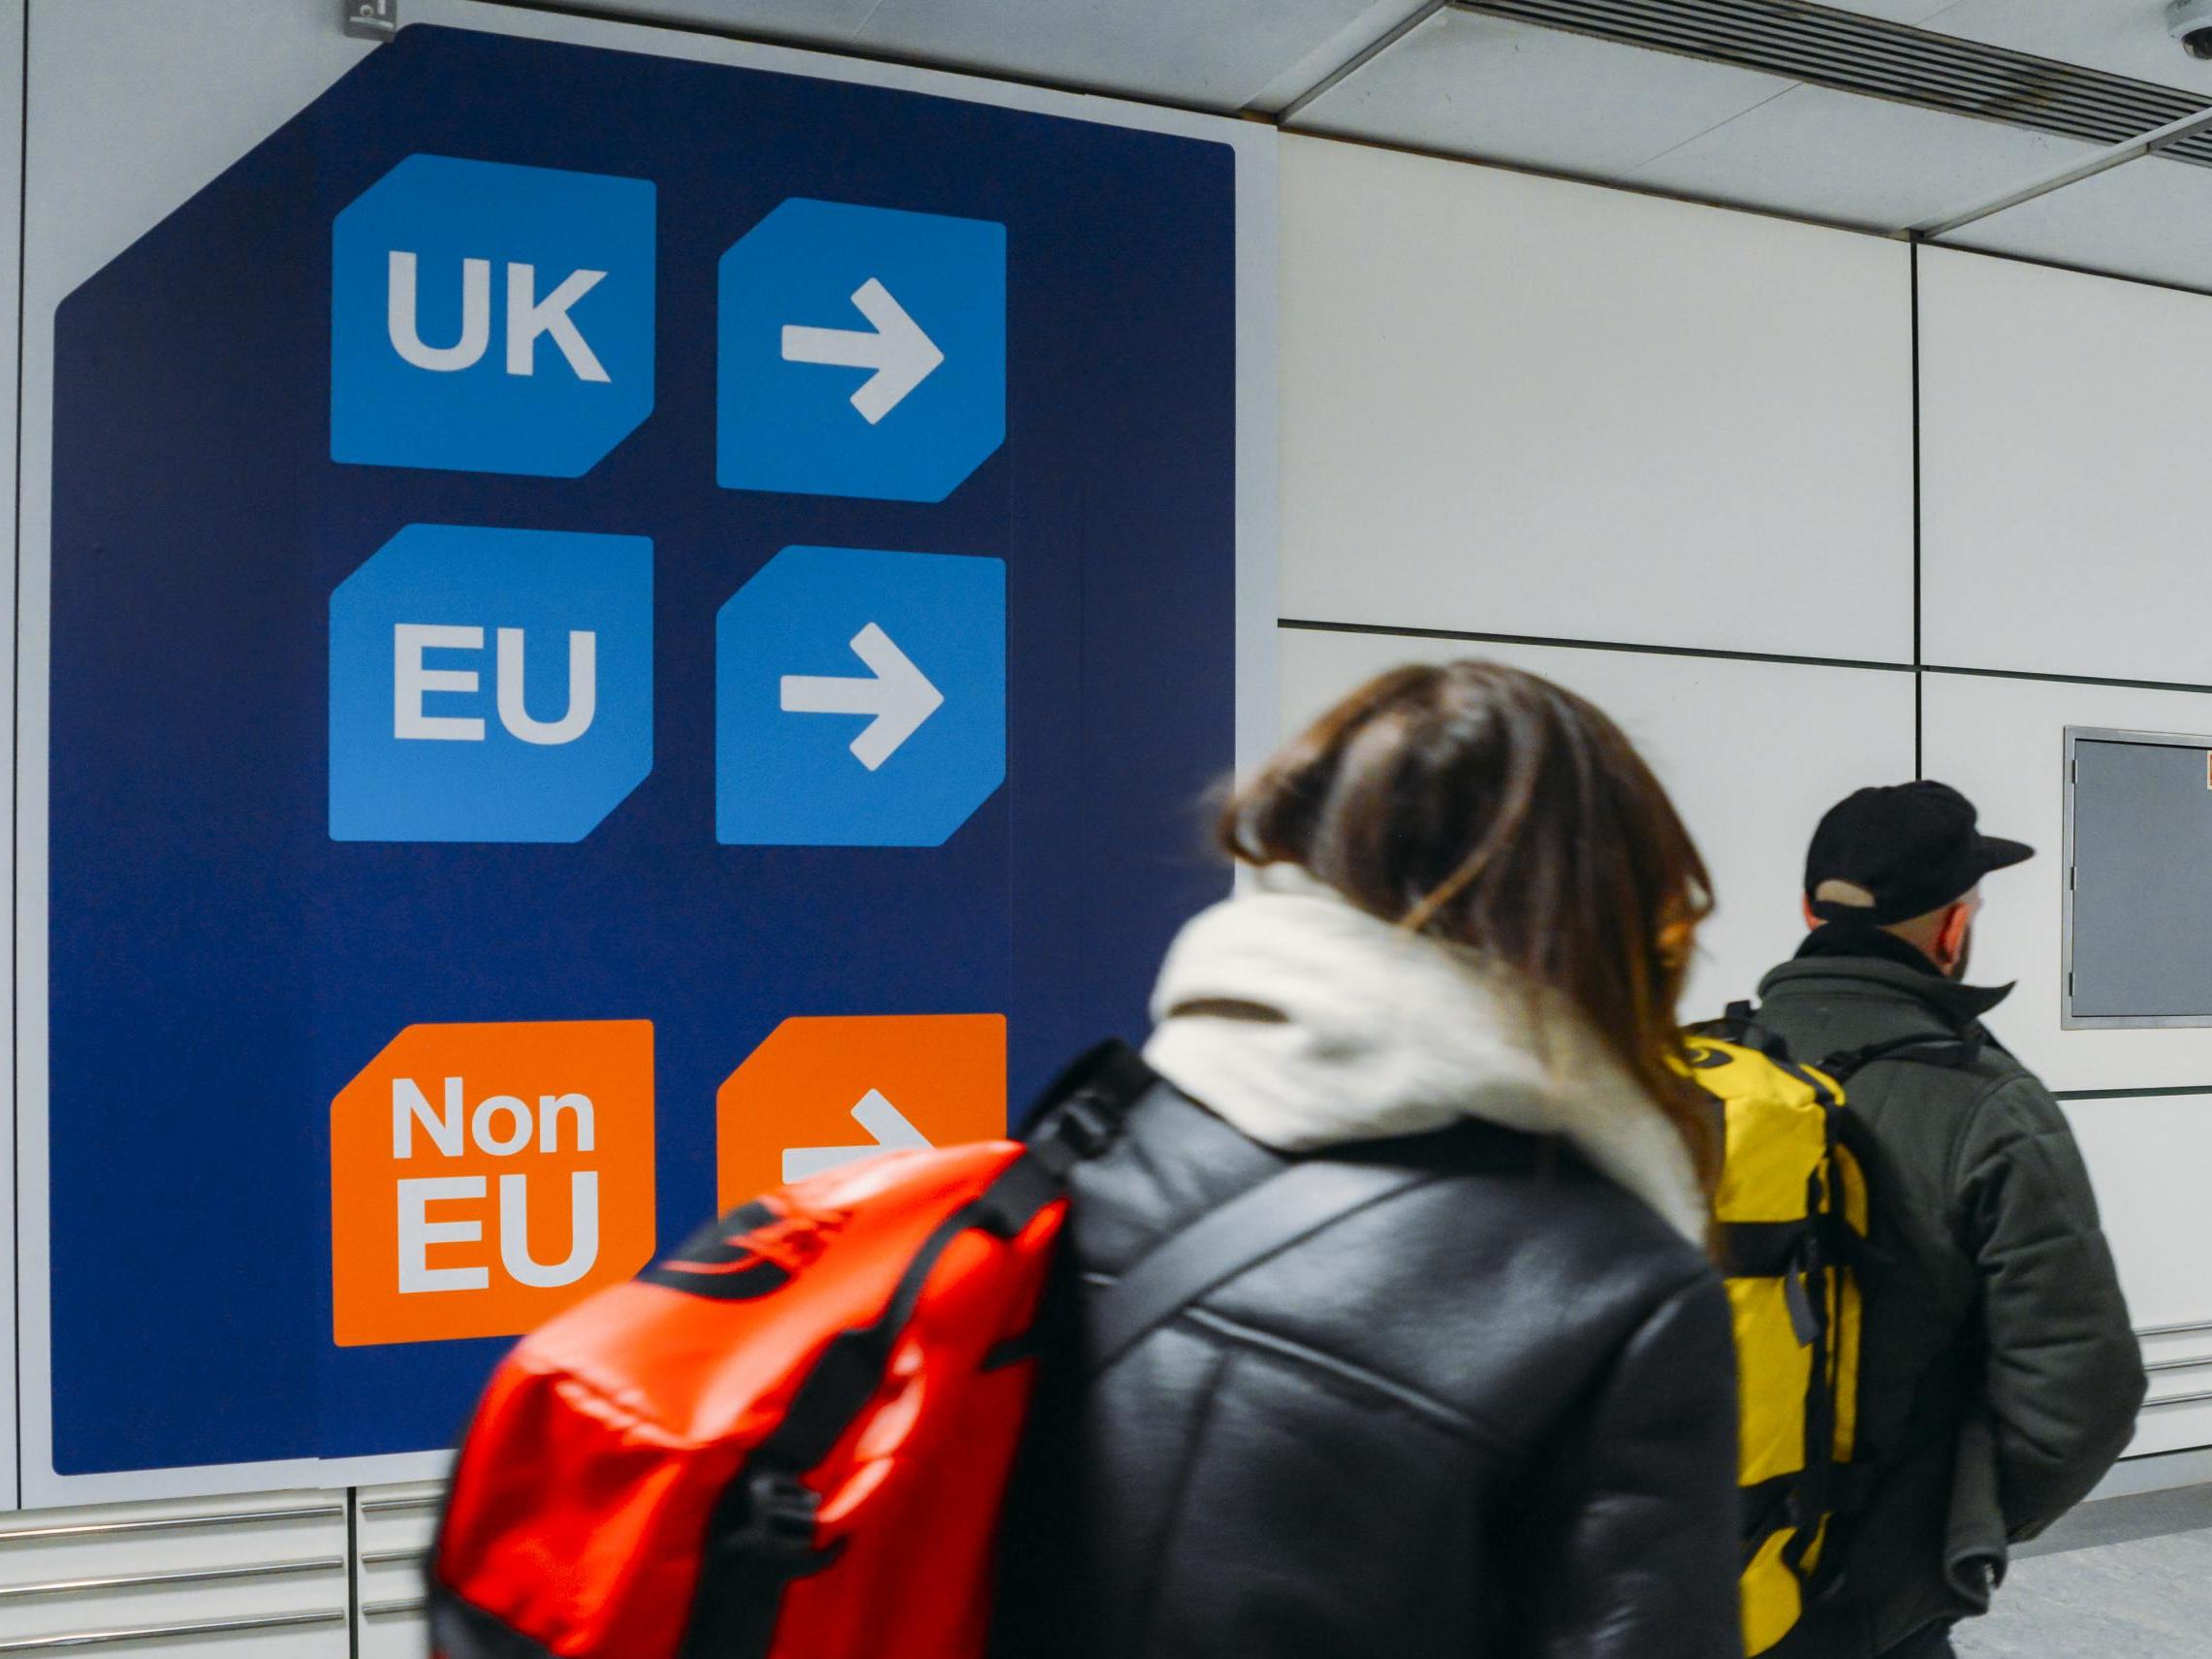 Passengers will be inconvenienced even if a deal is reached with the EU